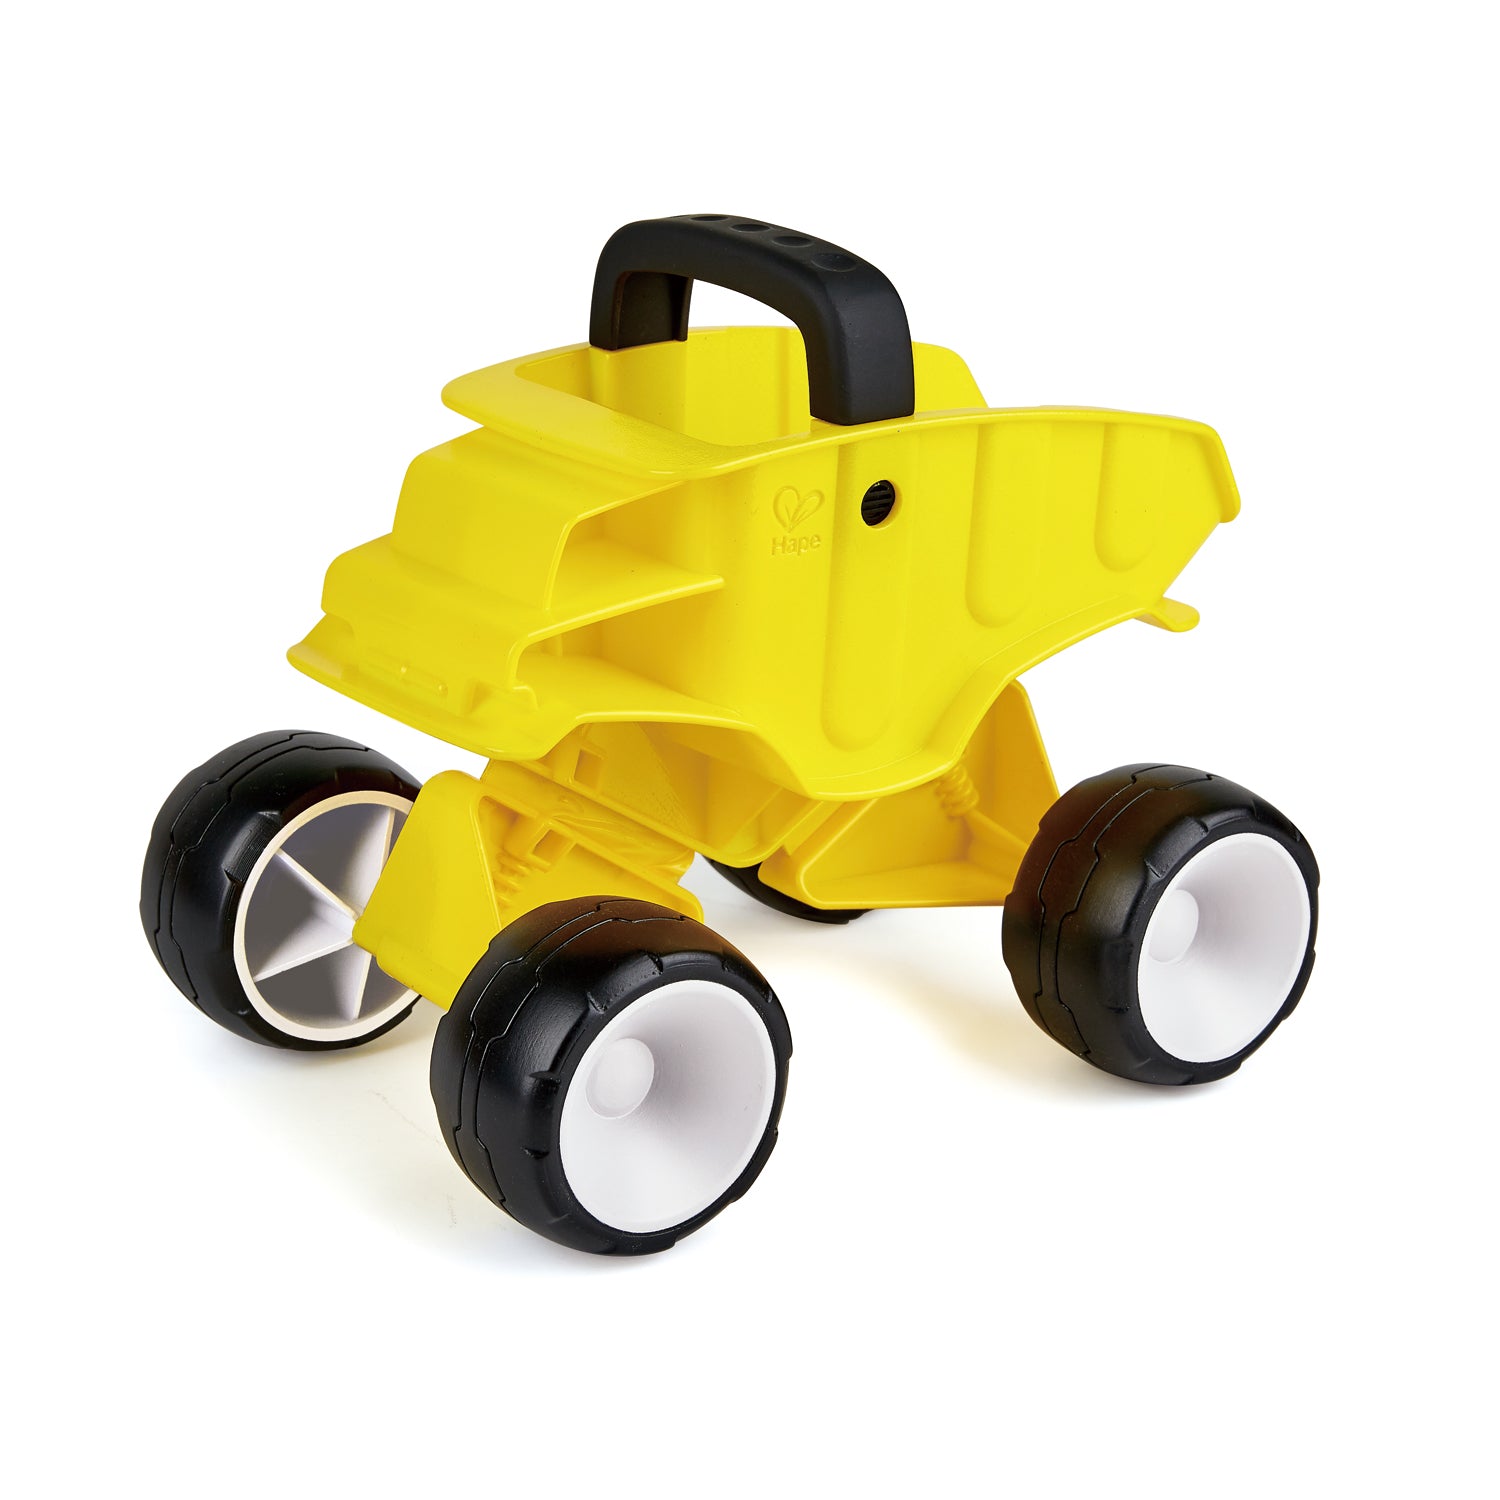 Hape Dump Truck - Yellow perfect for the sand or backyard play with quality outdoor toys The Toy Wagon